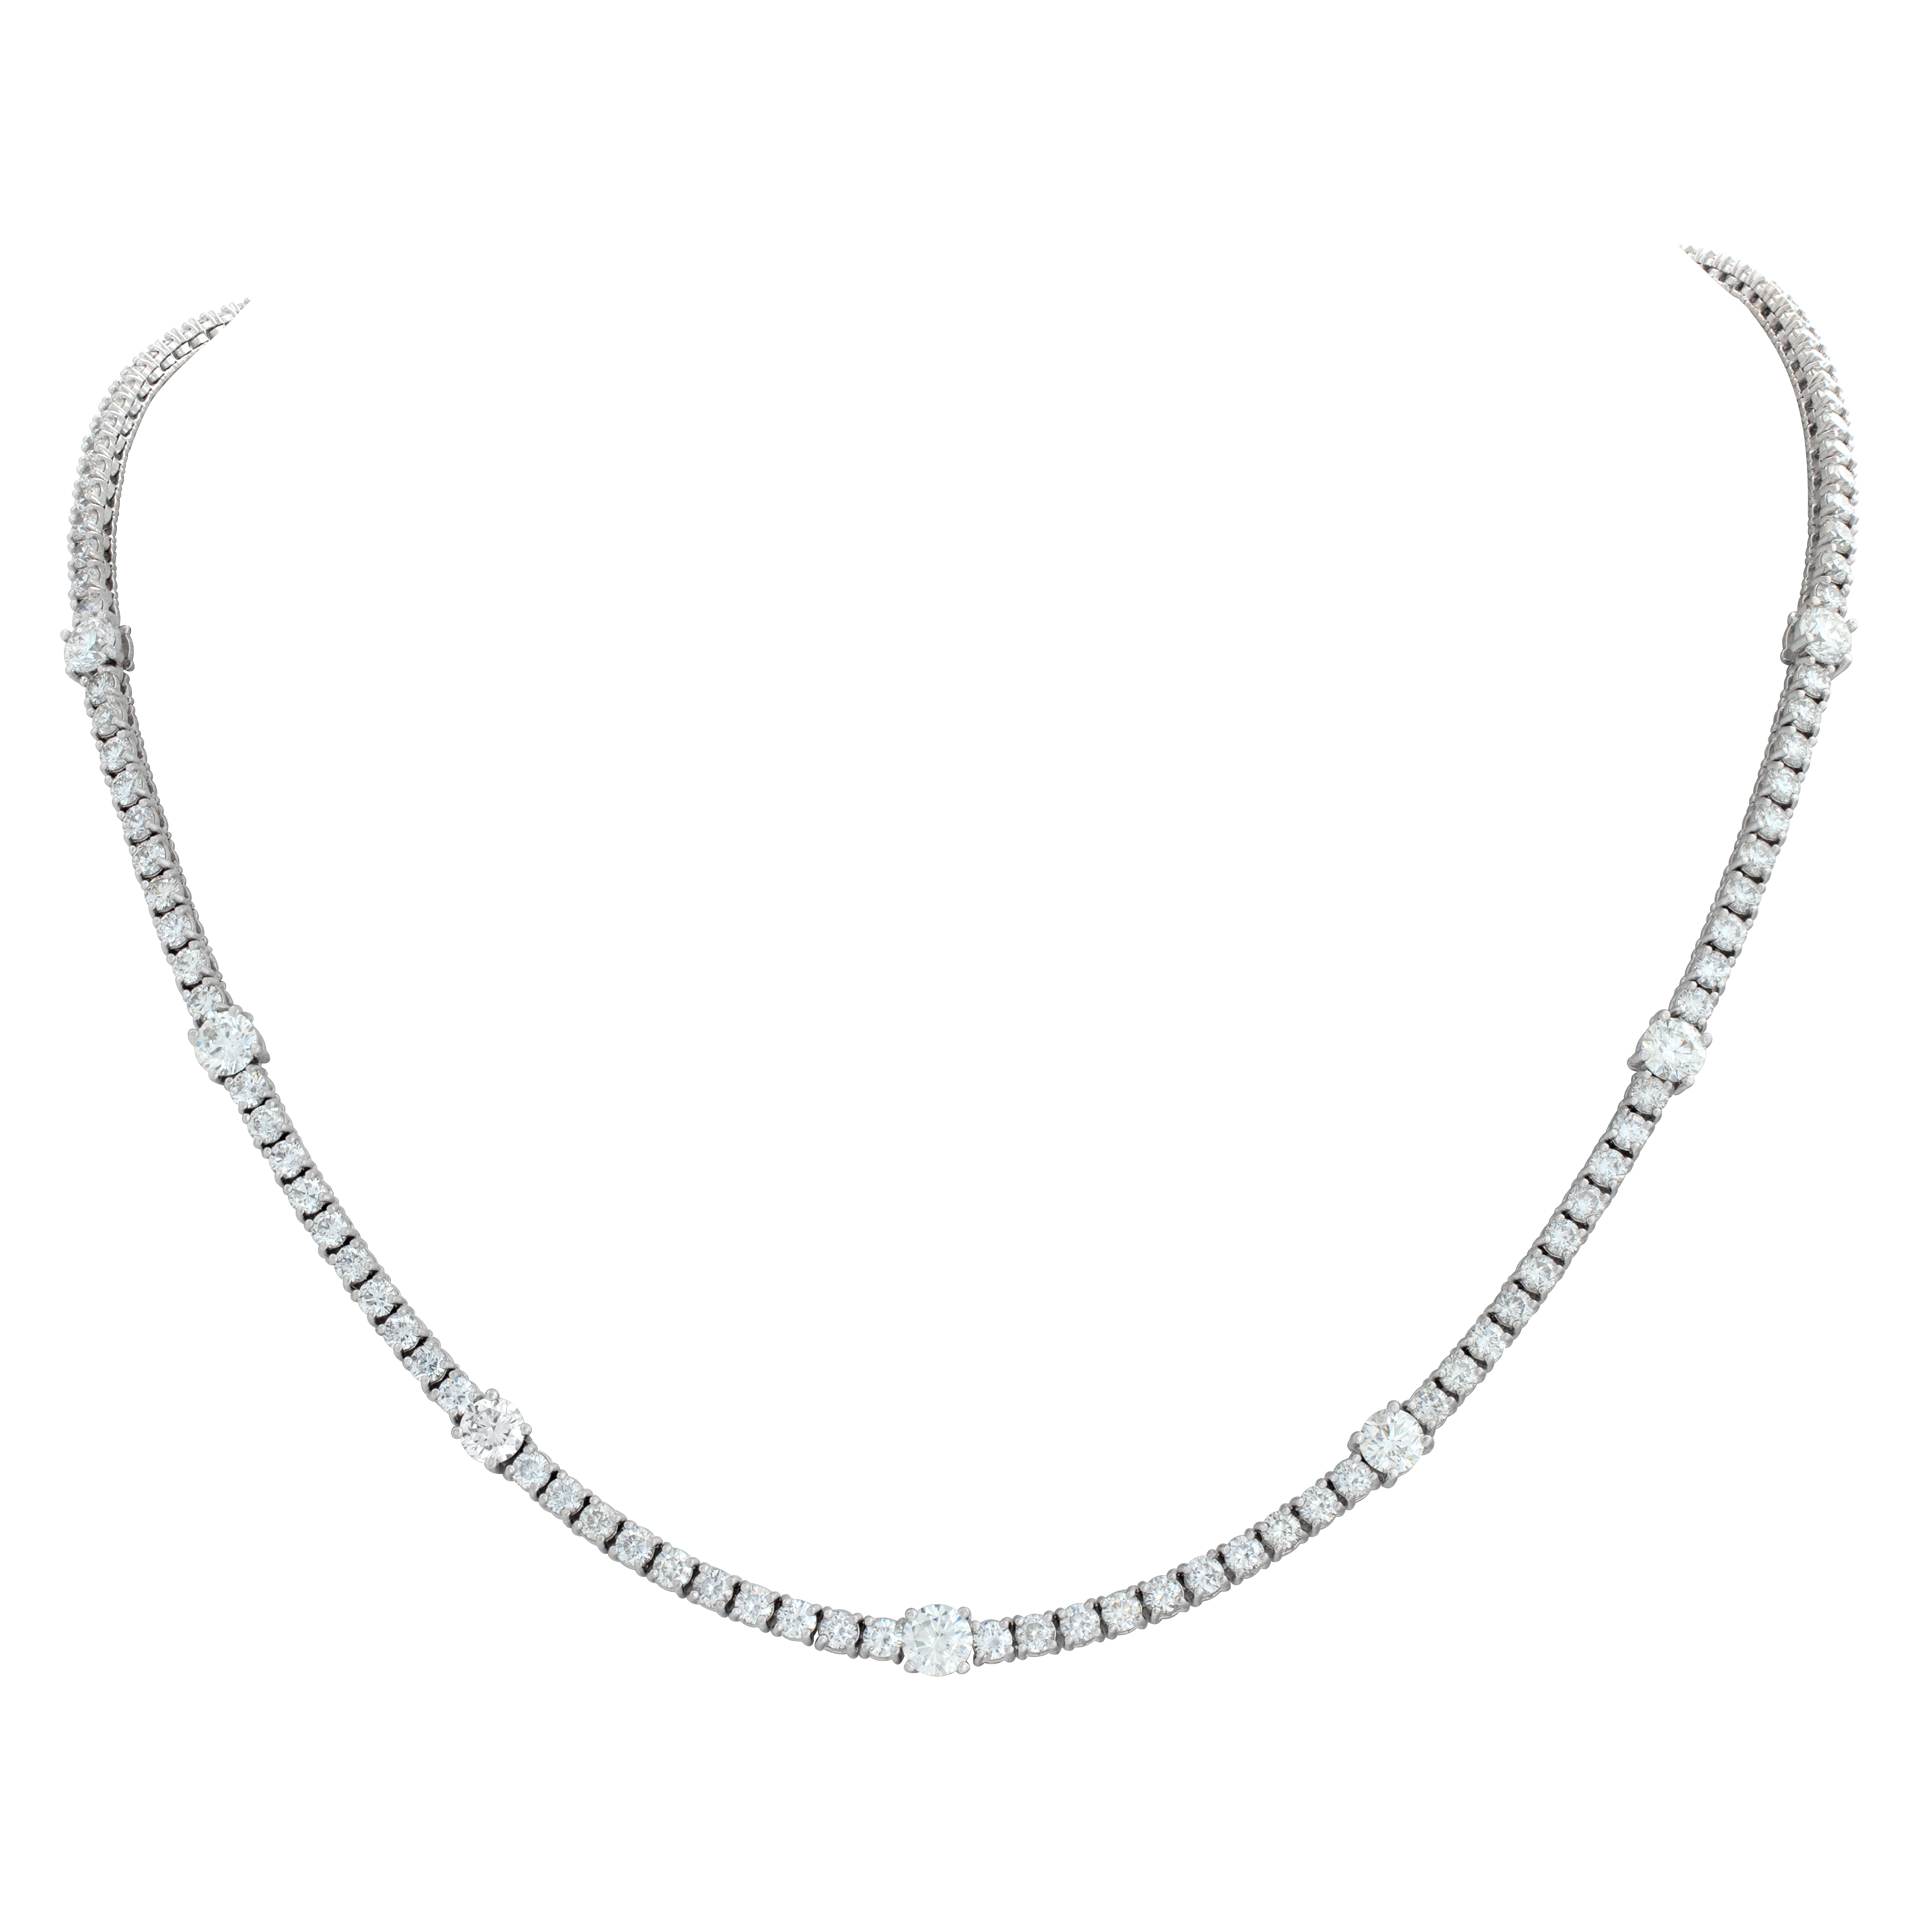 Diamond line necklace in 18k white gold. Round brilliant cut diamonds total approx. weight: 10.15 carats,